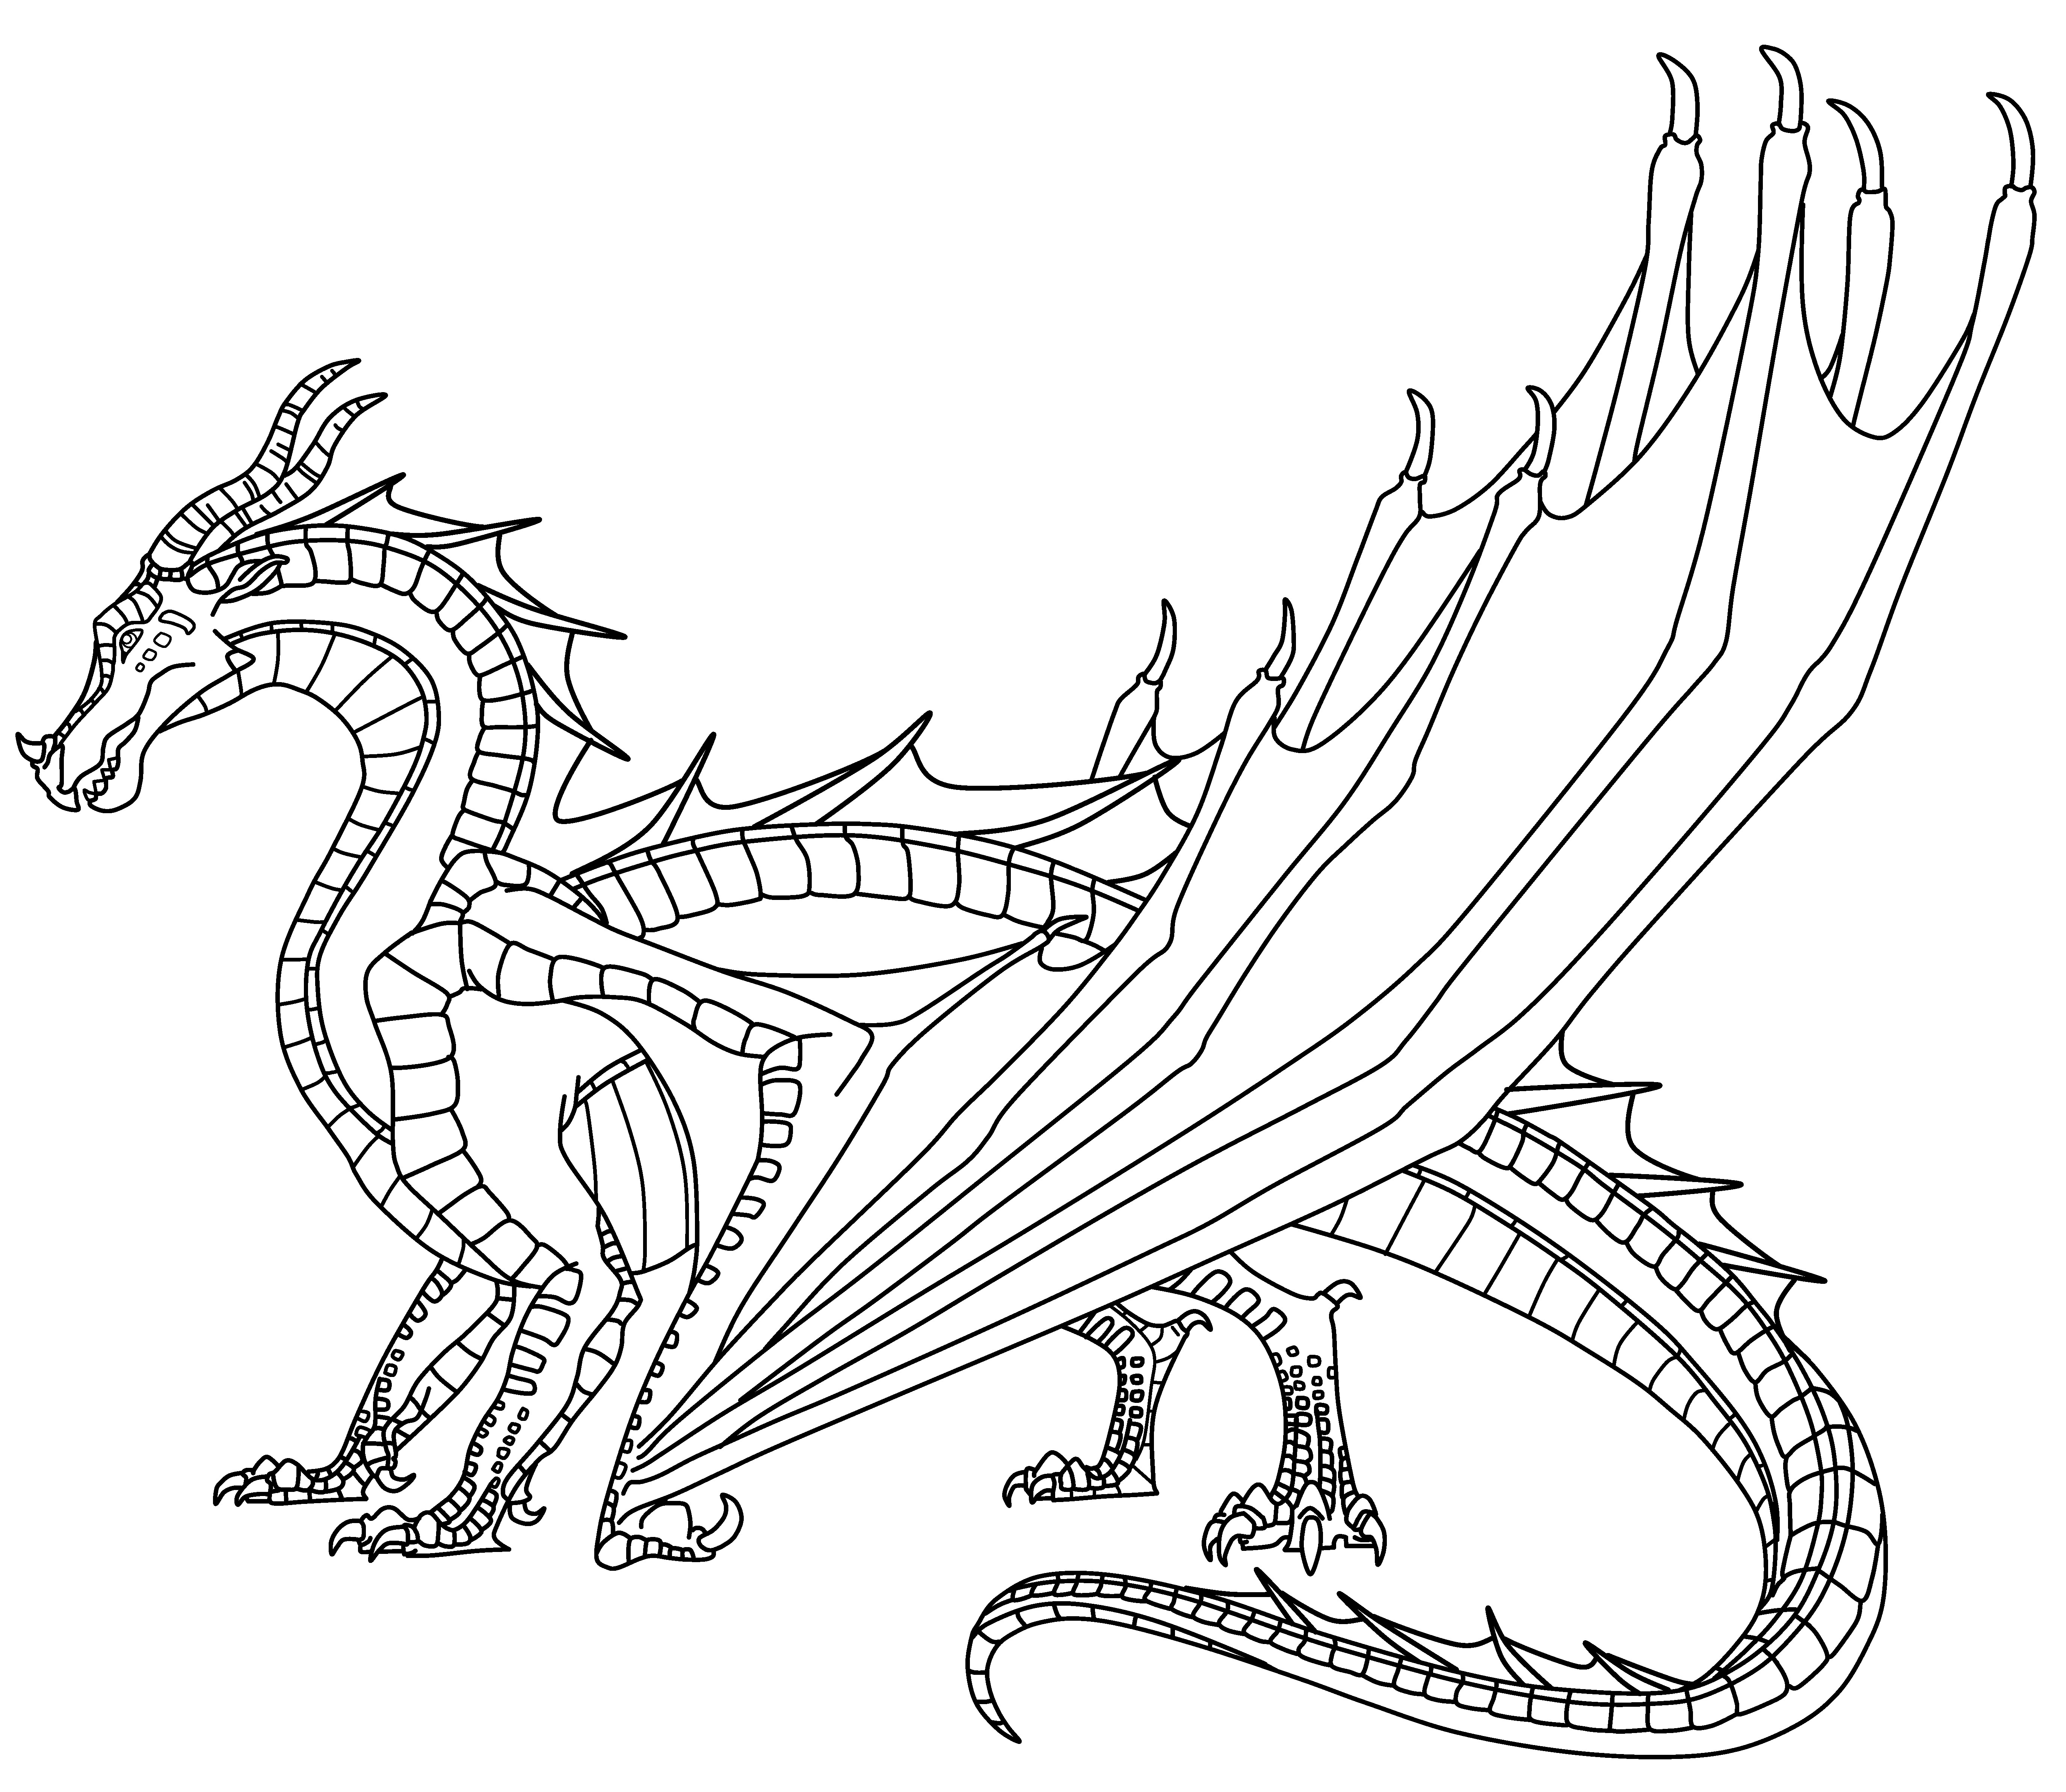 The best free Seawing coloring page images. Download from 14 free